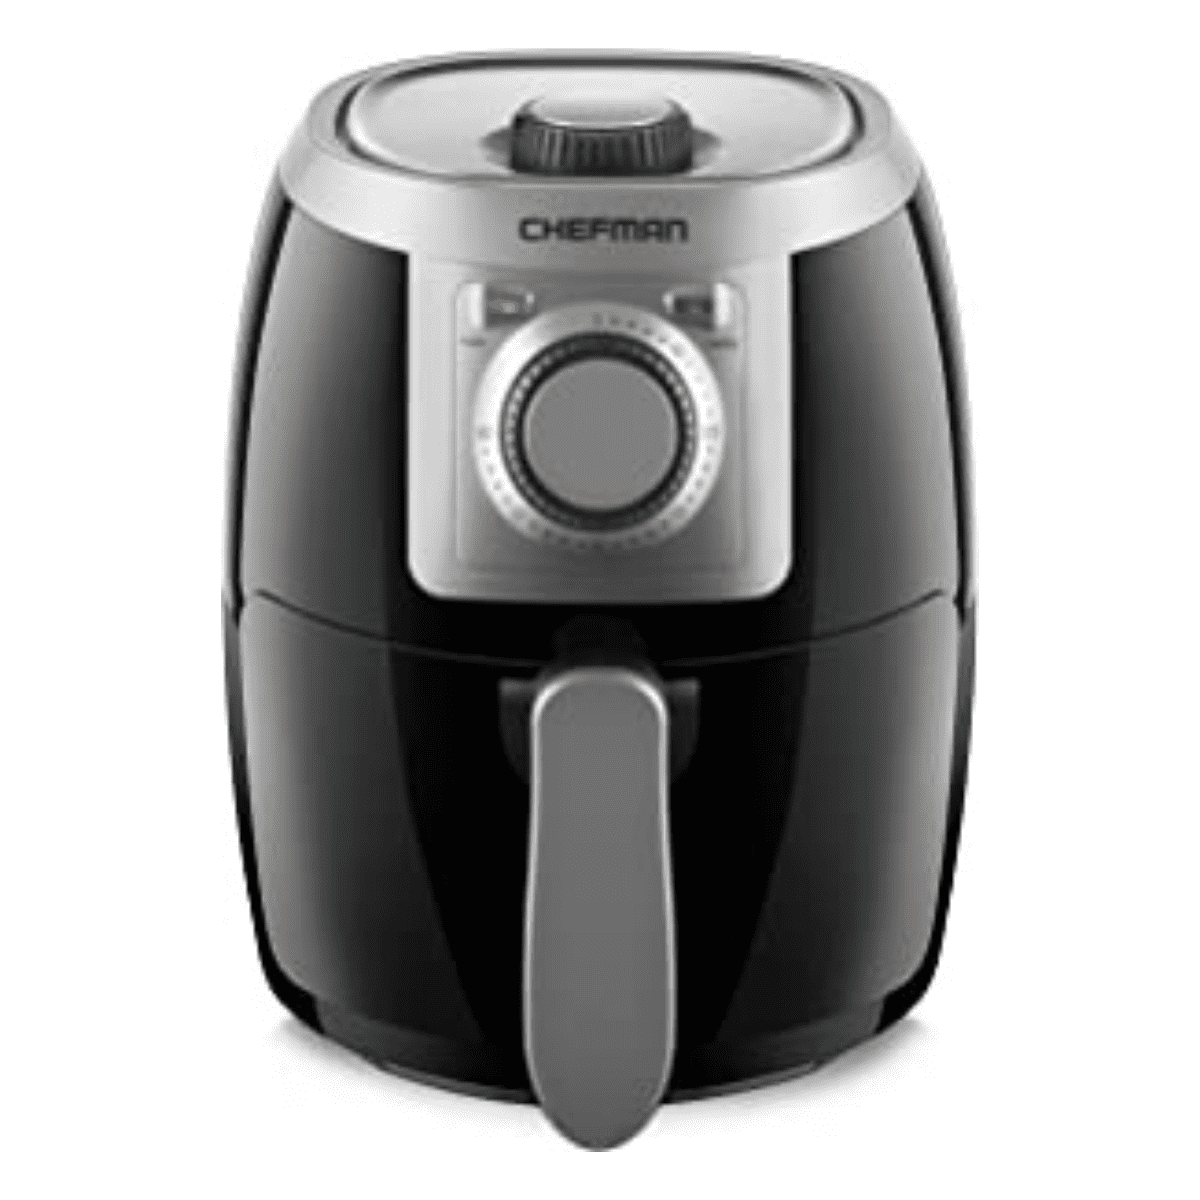 Dash DFAF455GBWH01 Deluxe Electric Air Fryer + Oven Cooker with